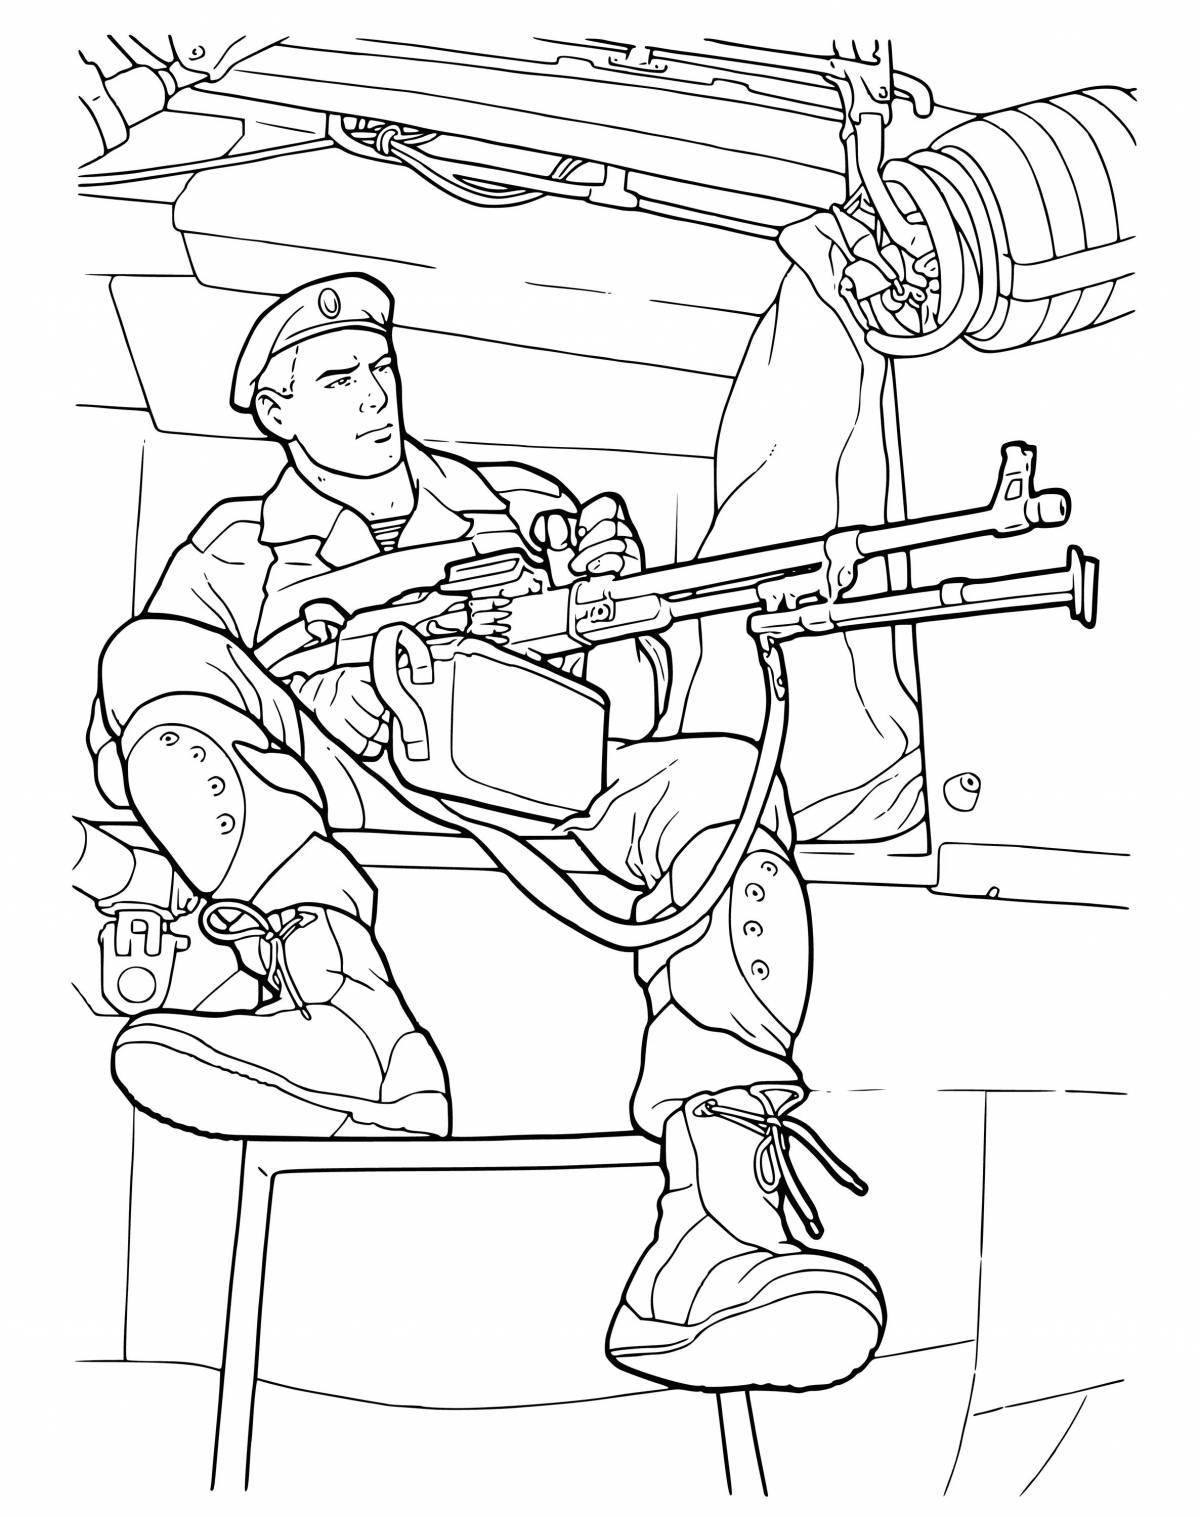 Relentless coloring page stands guard